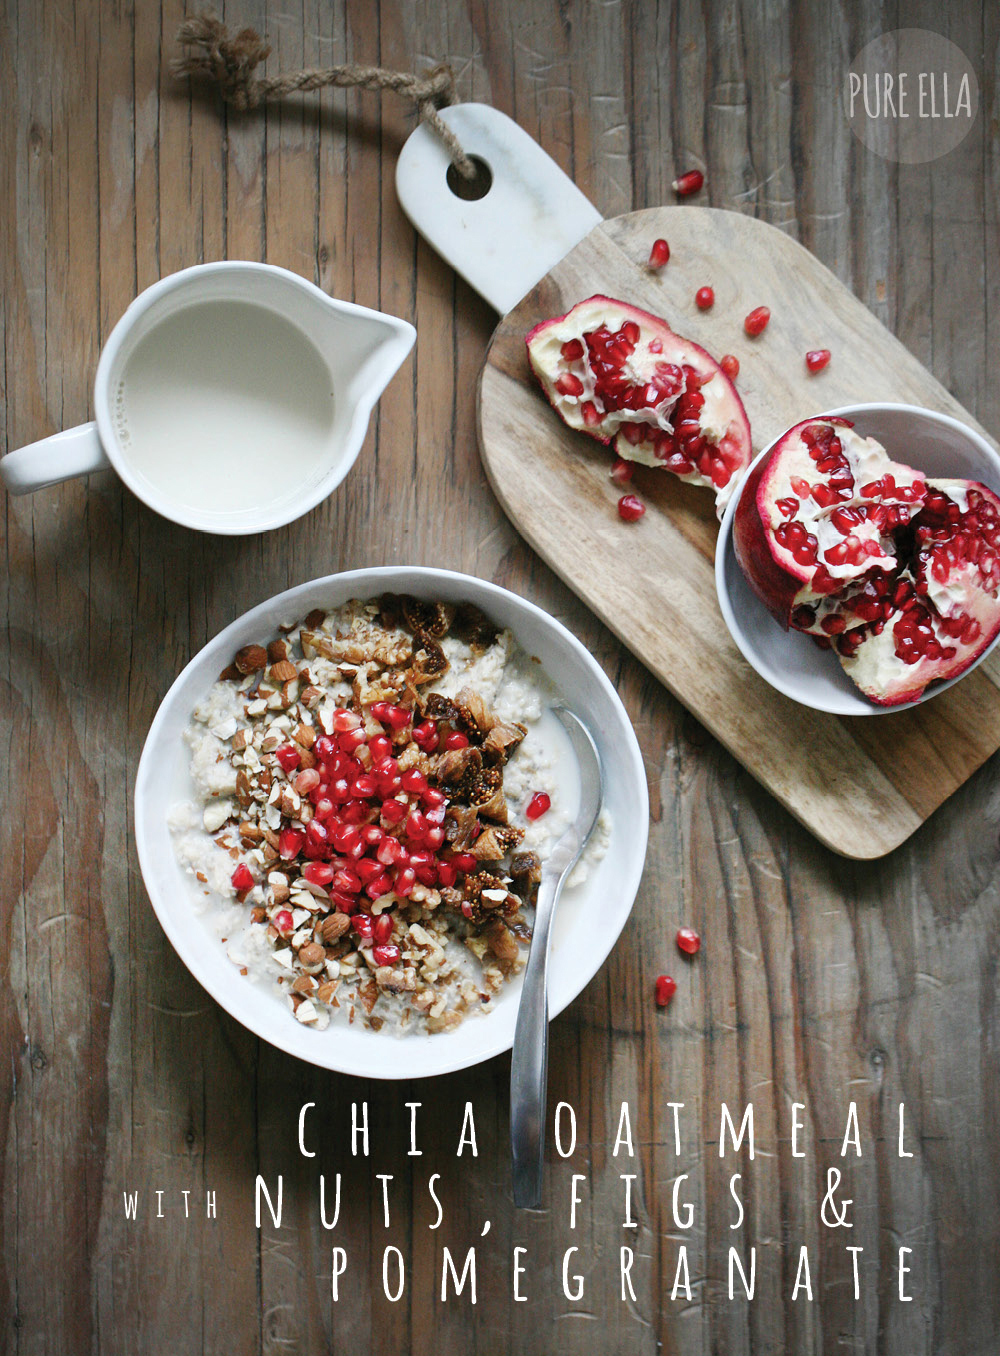 Pure-Ella-Chia-Oatmeal-with-Nuts-Figs-and-Pomegranate